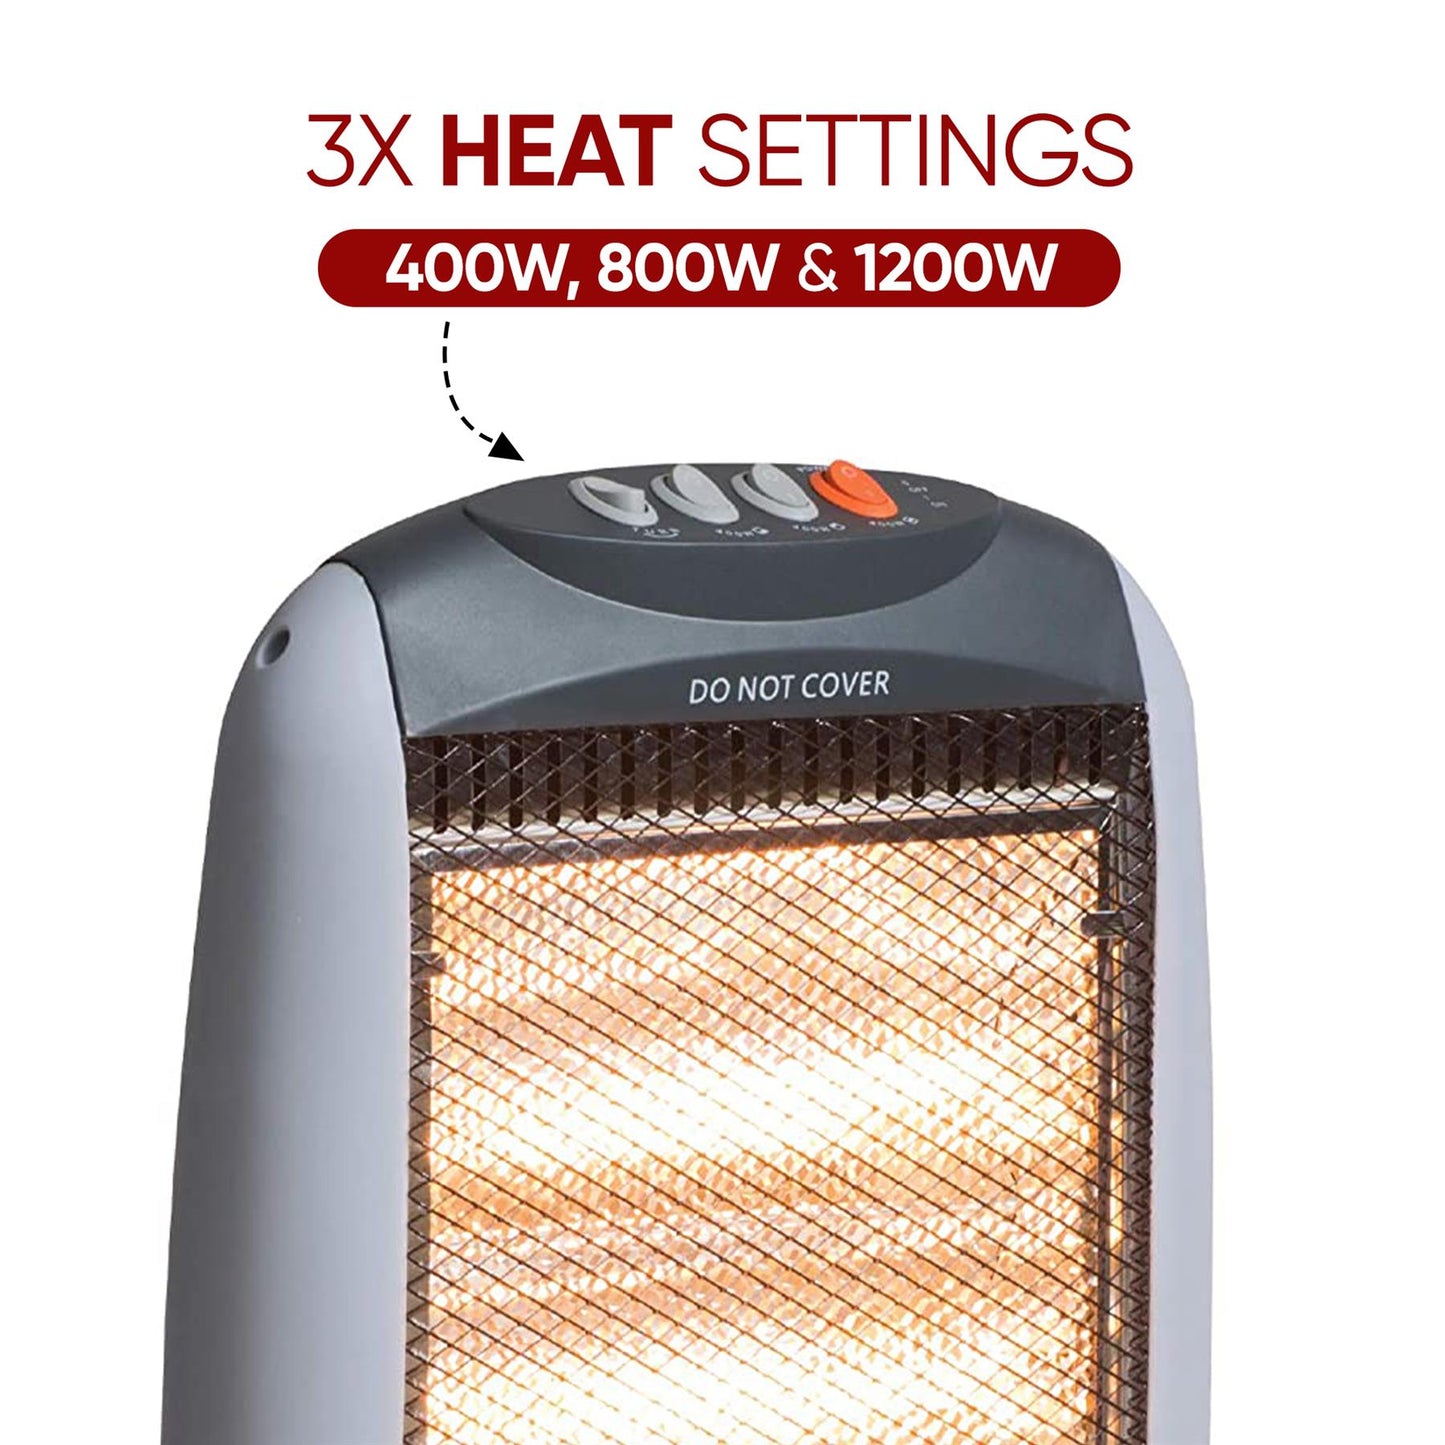 Stay Warm Anywhere with Portable Heaters